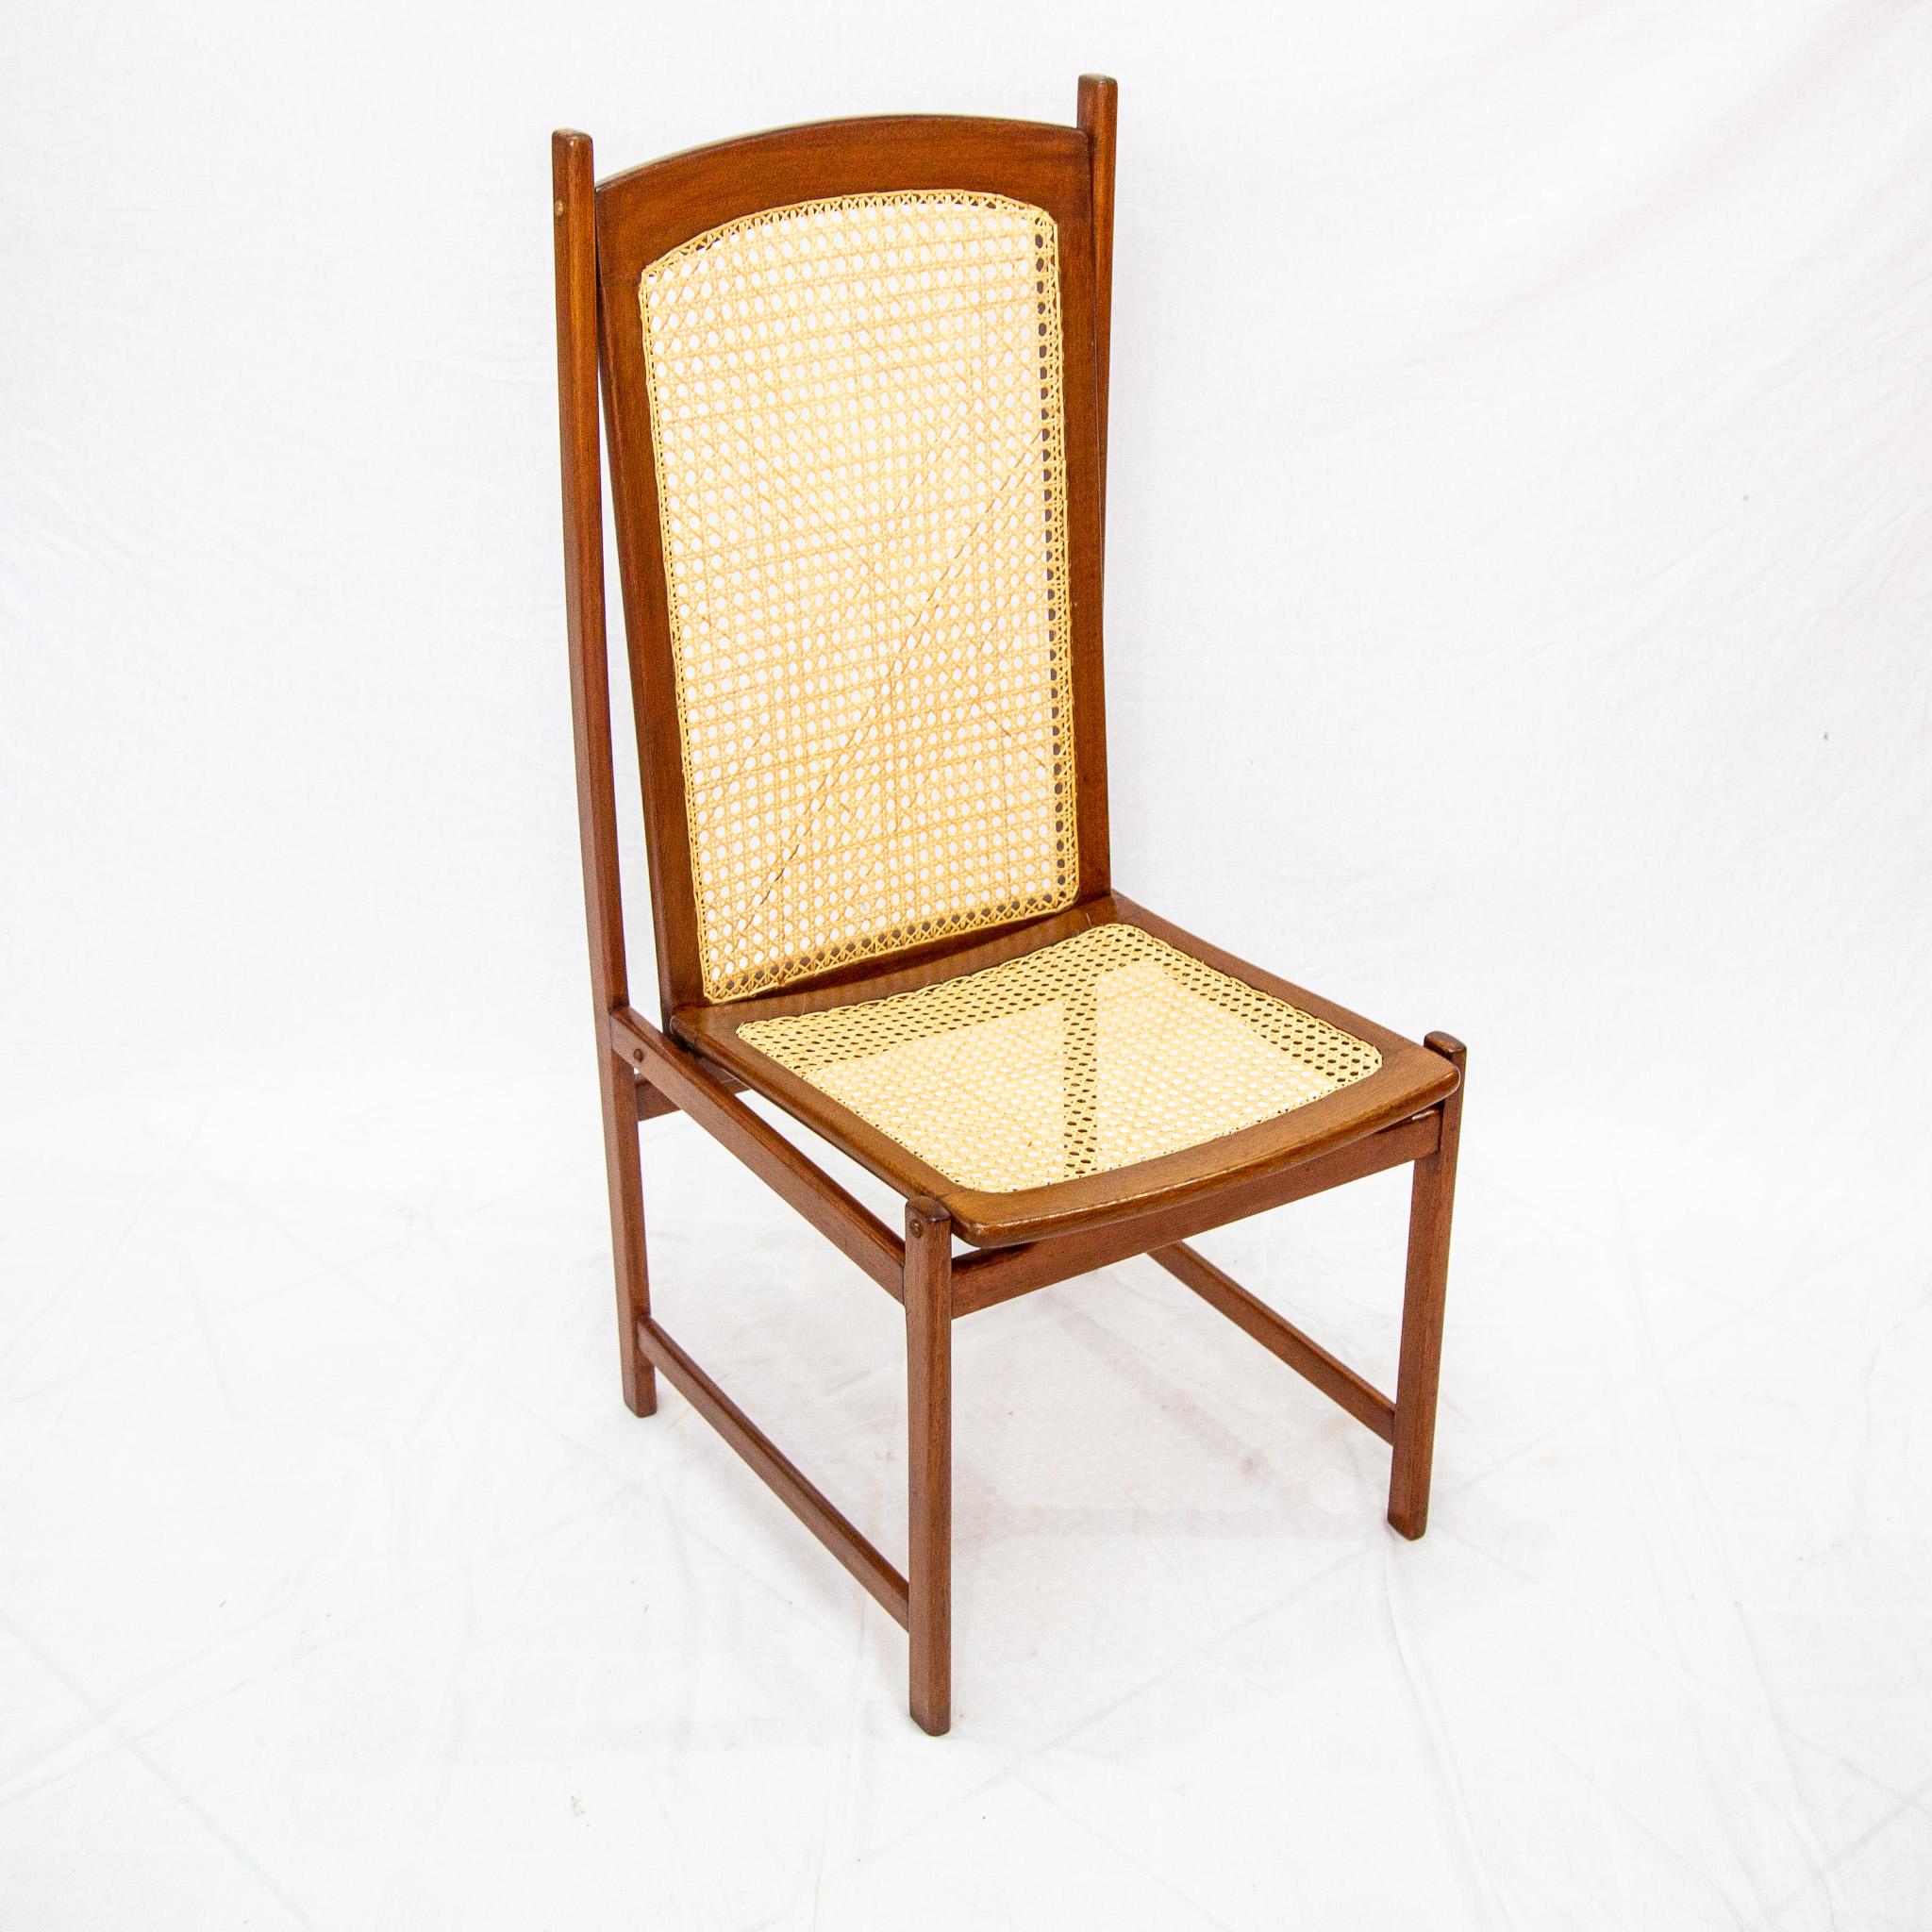 Brazilian Mid-Century Modern Dining Chair Set in Hardwood & Caning, Celina, Brazil, 1960s For Sale